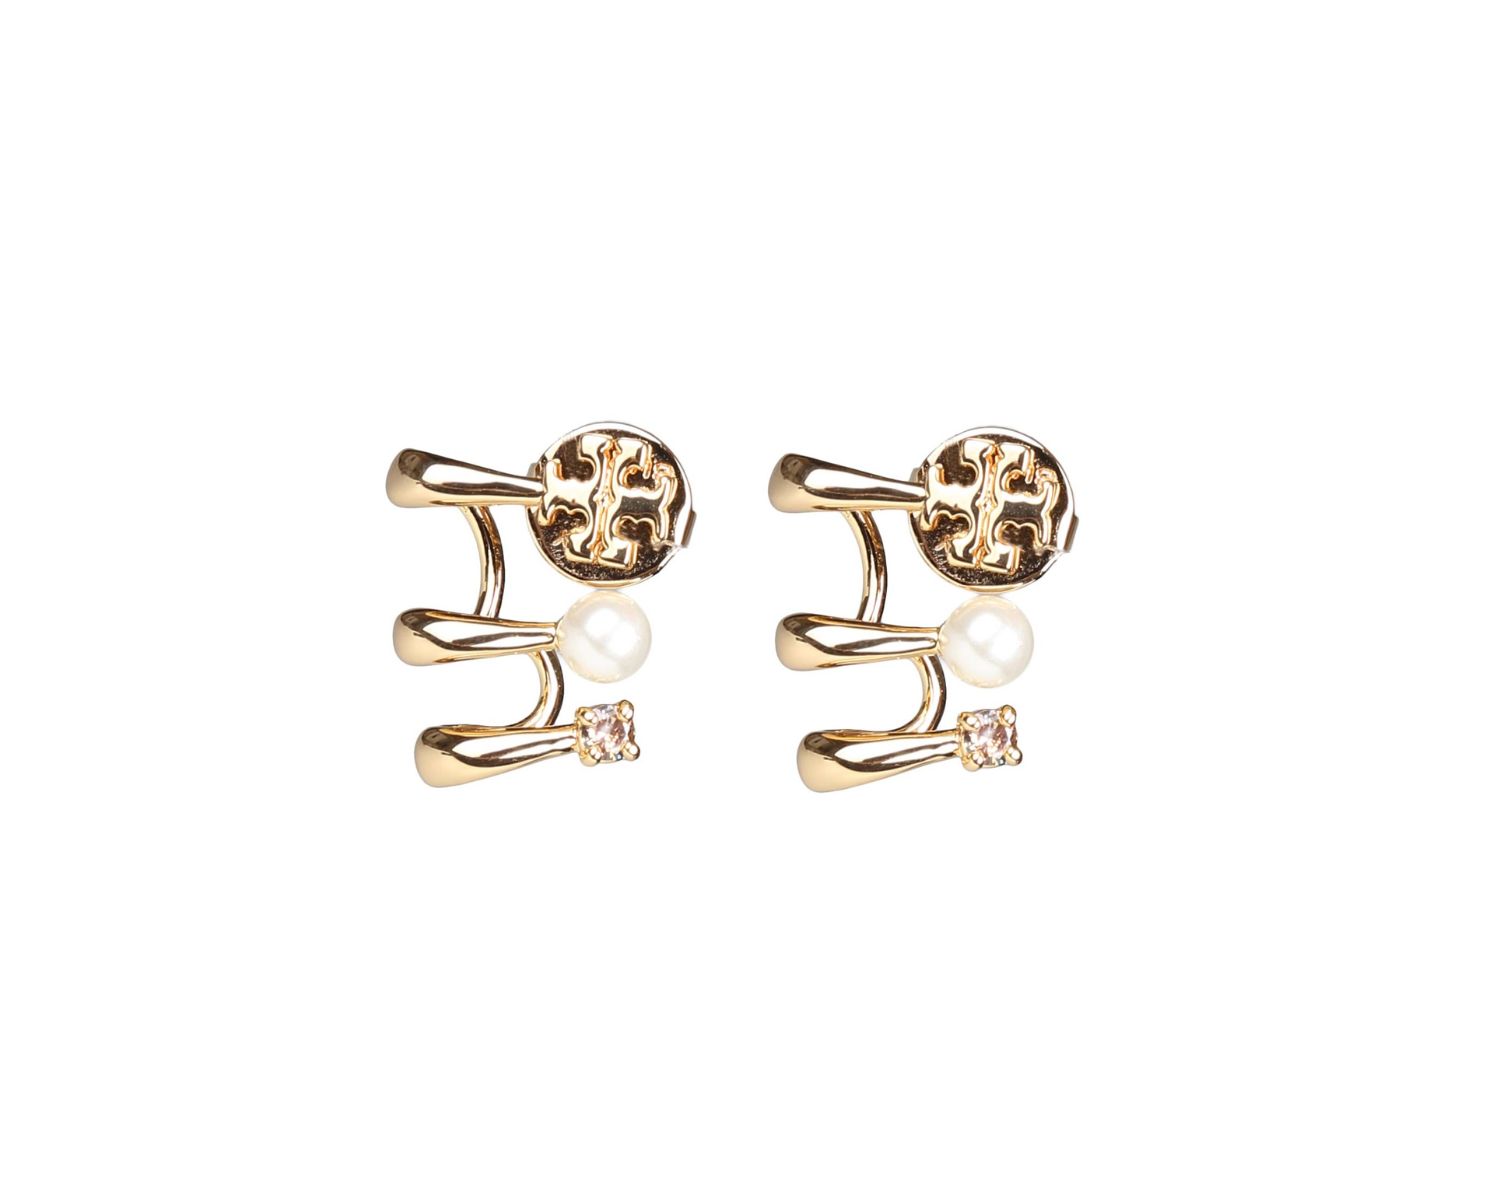 14-astounding-facts-about-tory-burch-earrings